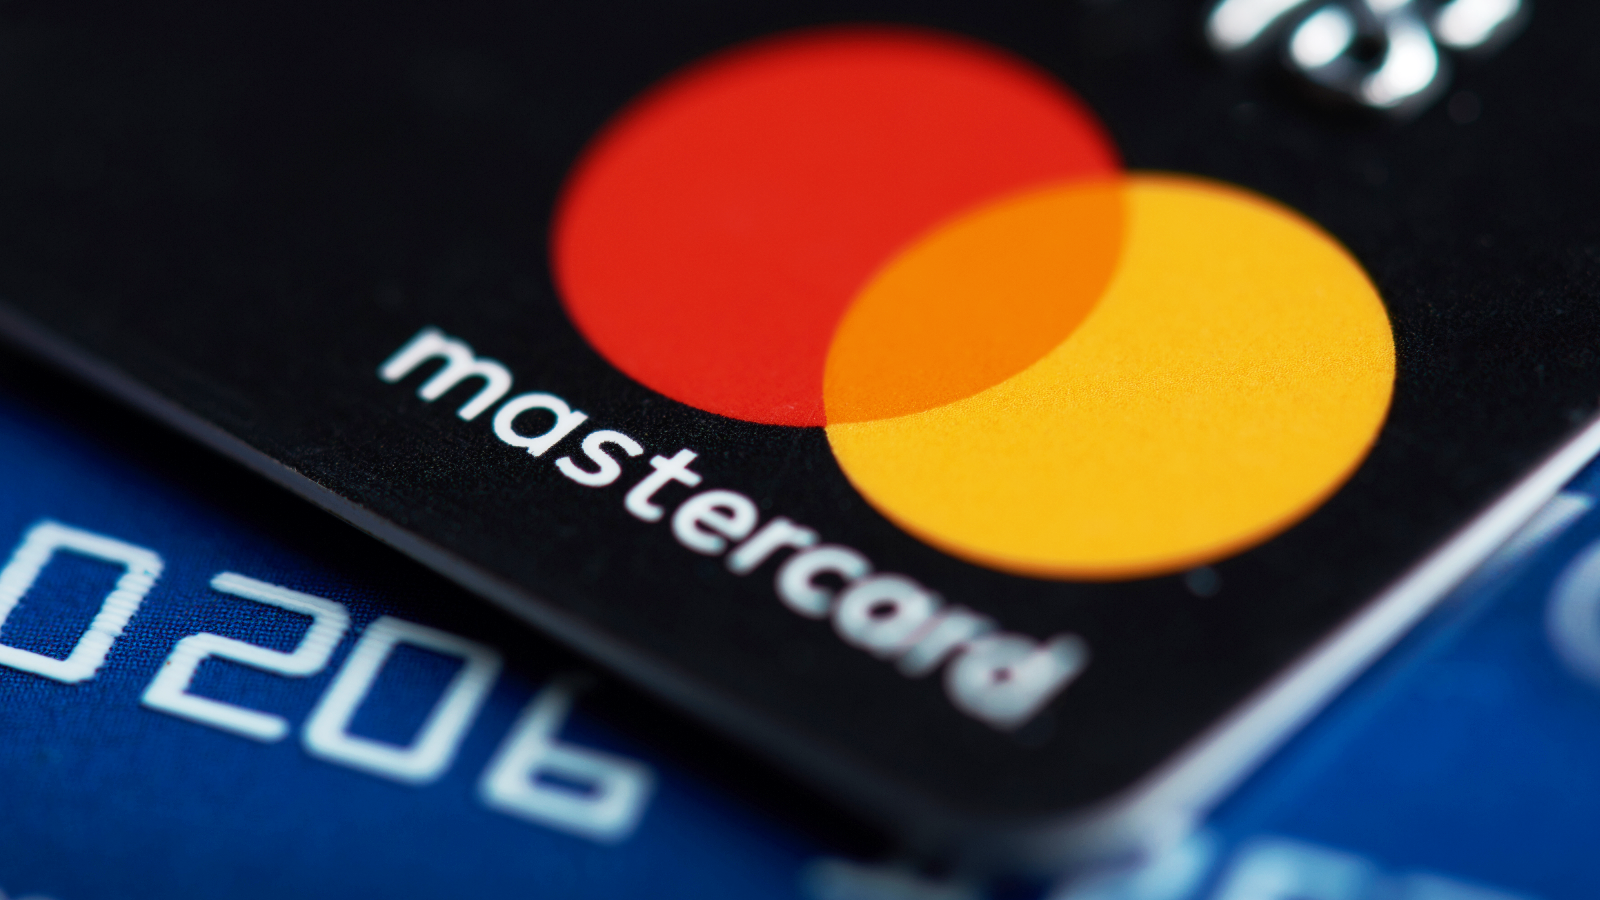 image-Mastercard Partners with Polygon, Solana, Ava, and Others to Launch Crypto Credential System